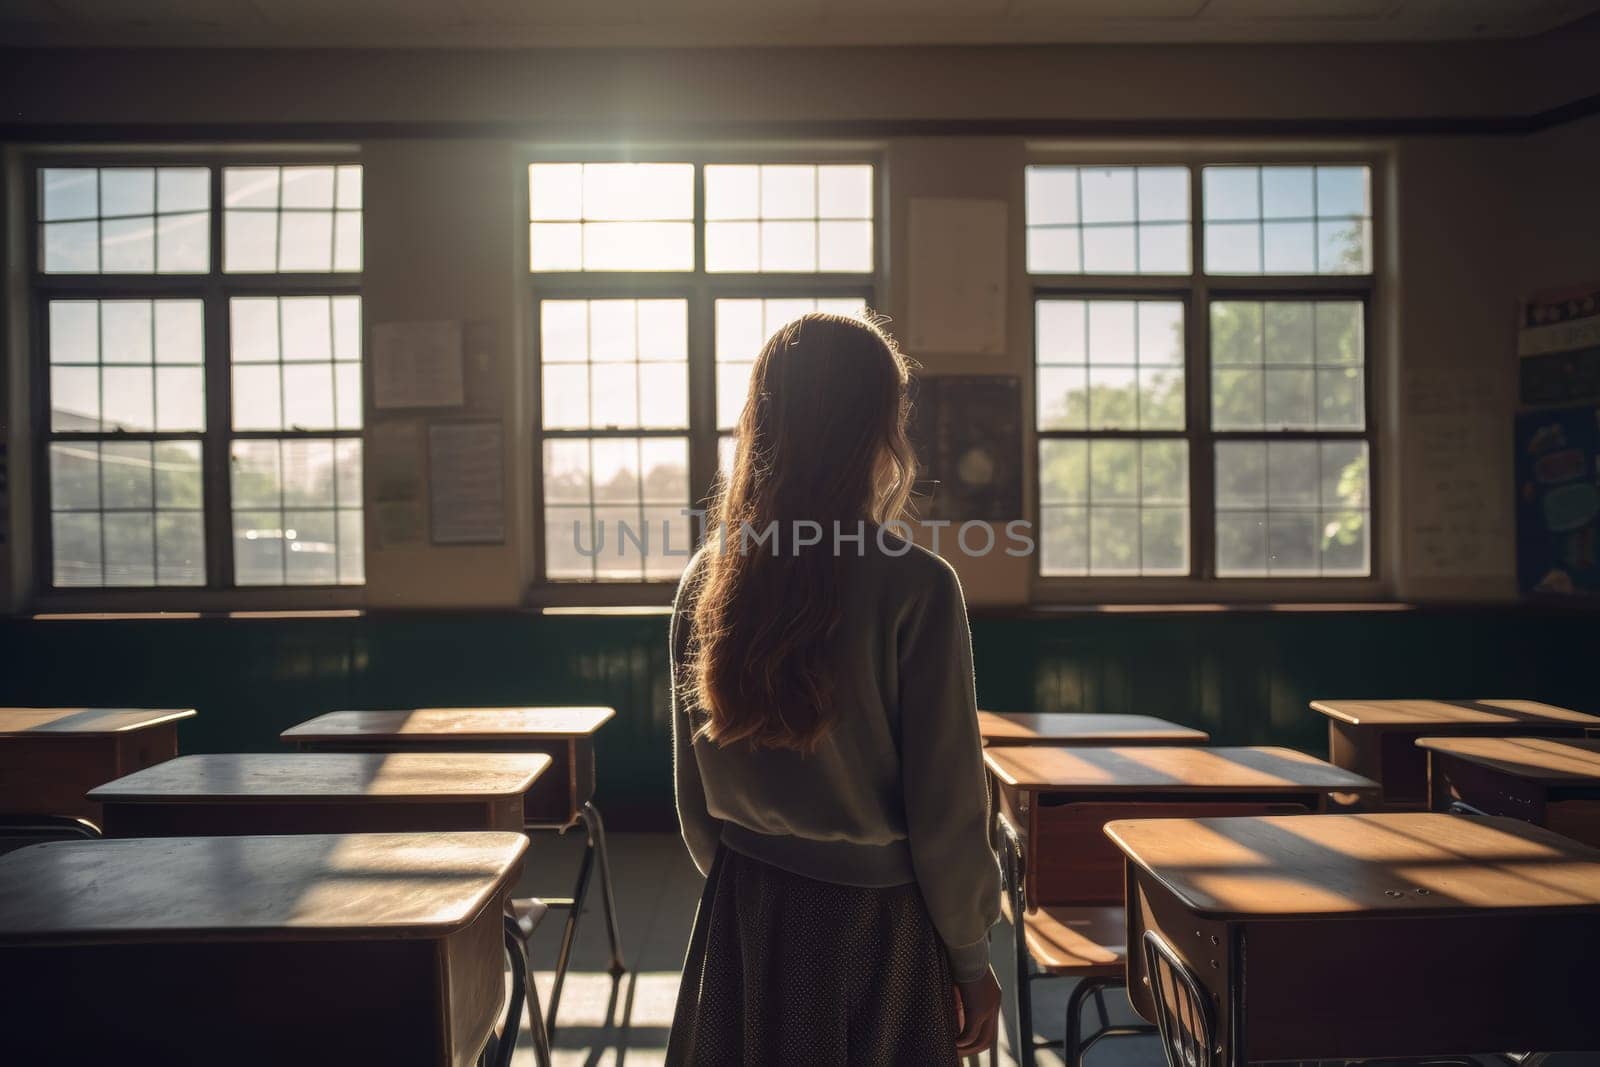 Solitude in a Sunlit Classroom by andreyz